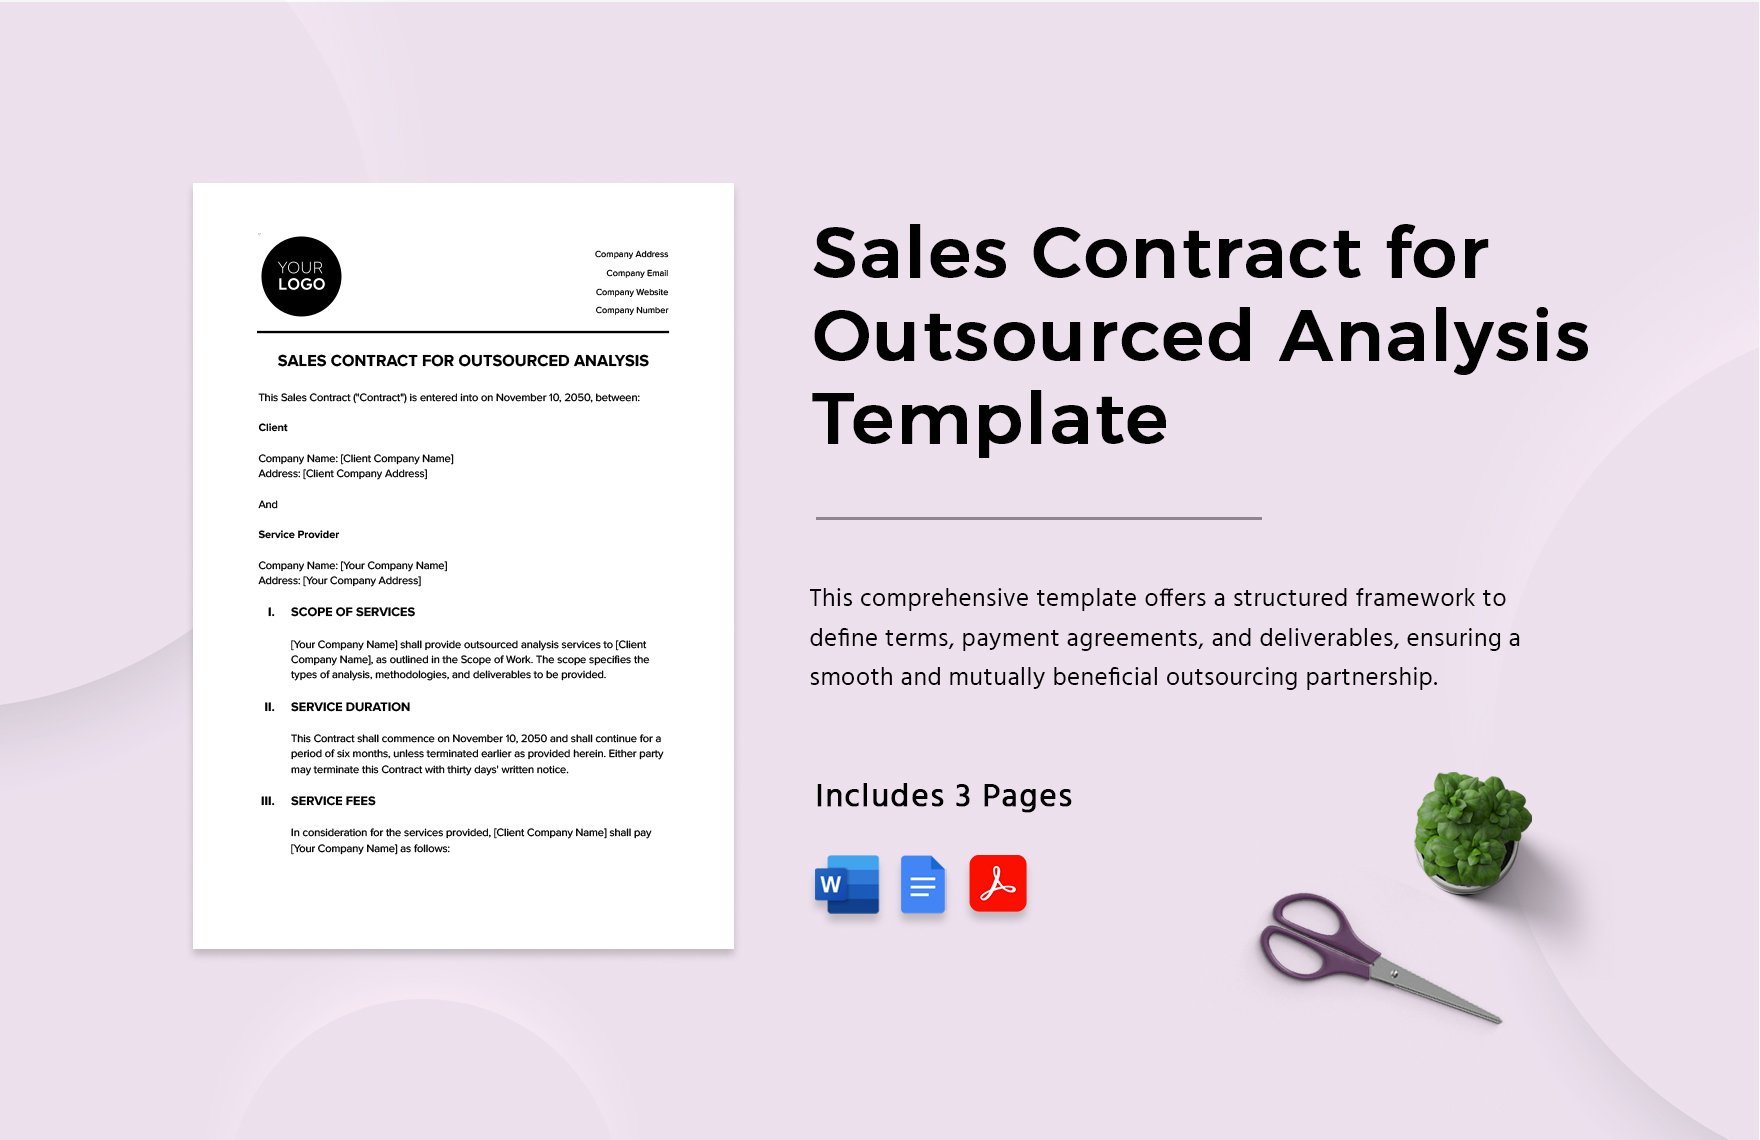 Sales Contract for Outsourced Analysis Template